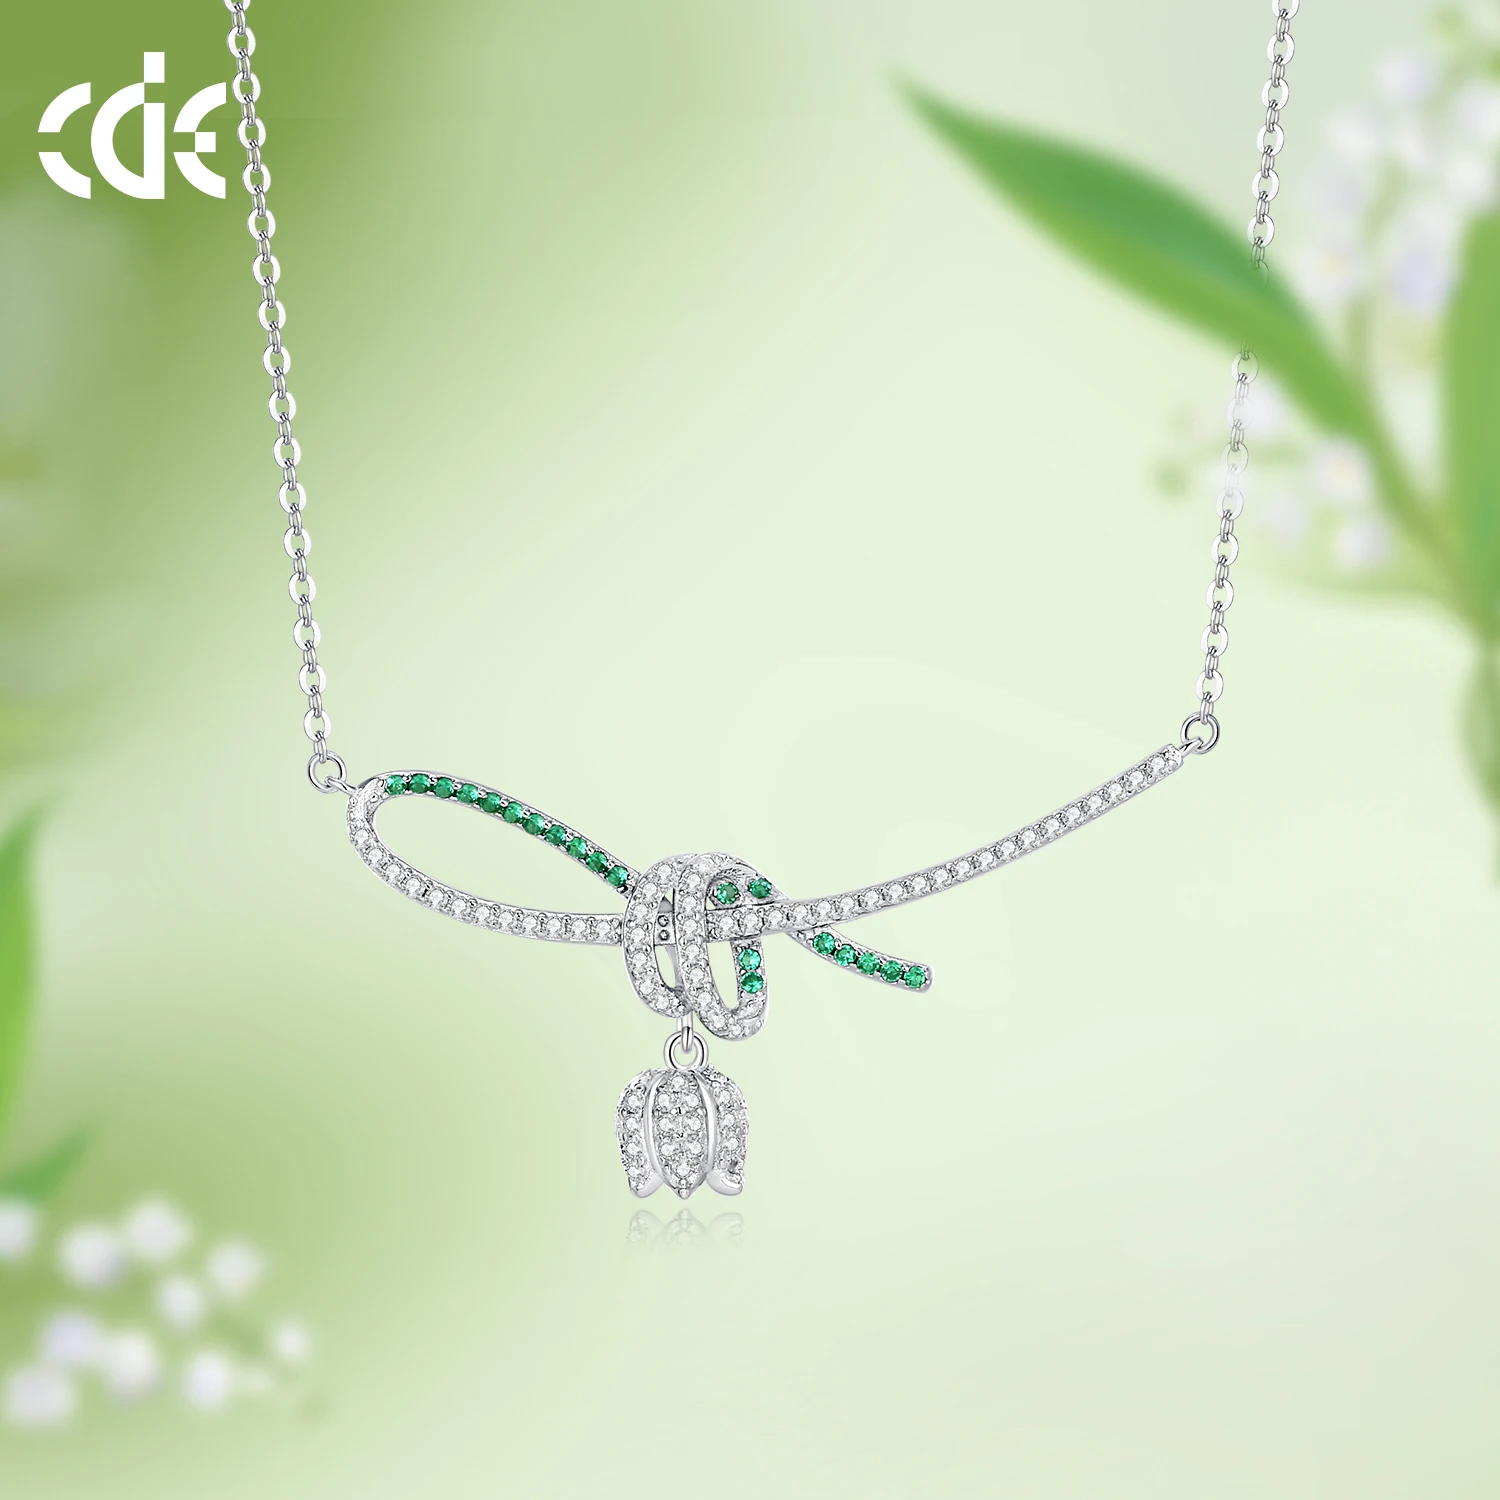 CDE YN1039 Fine Jewelry 925S Silver Women Necklace The Spring Bells Collection With 5A Zirconia Rhoduim Plated Pendant Necklace